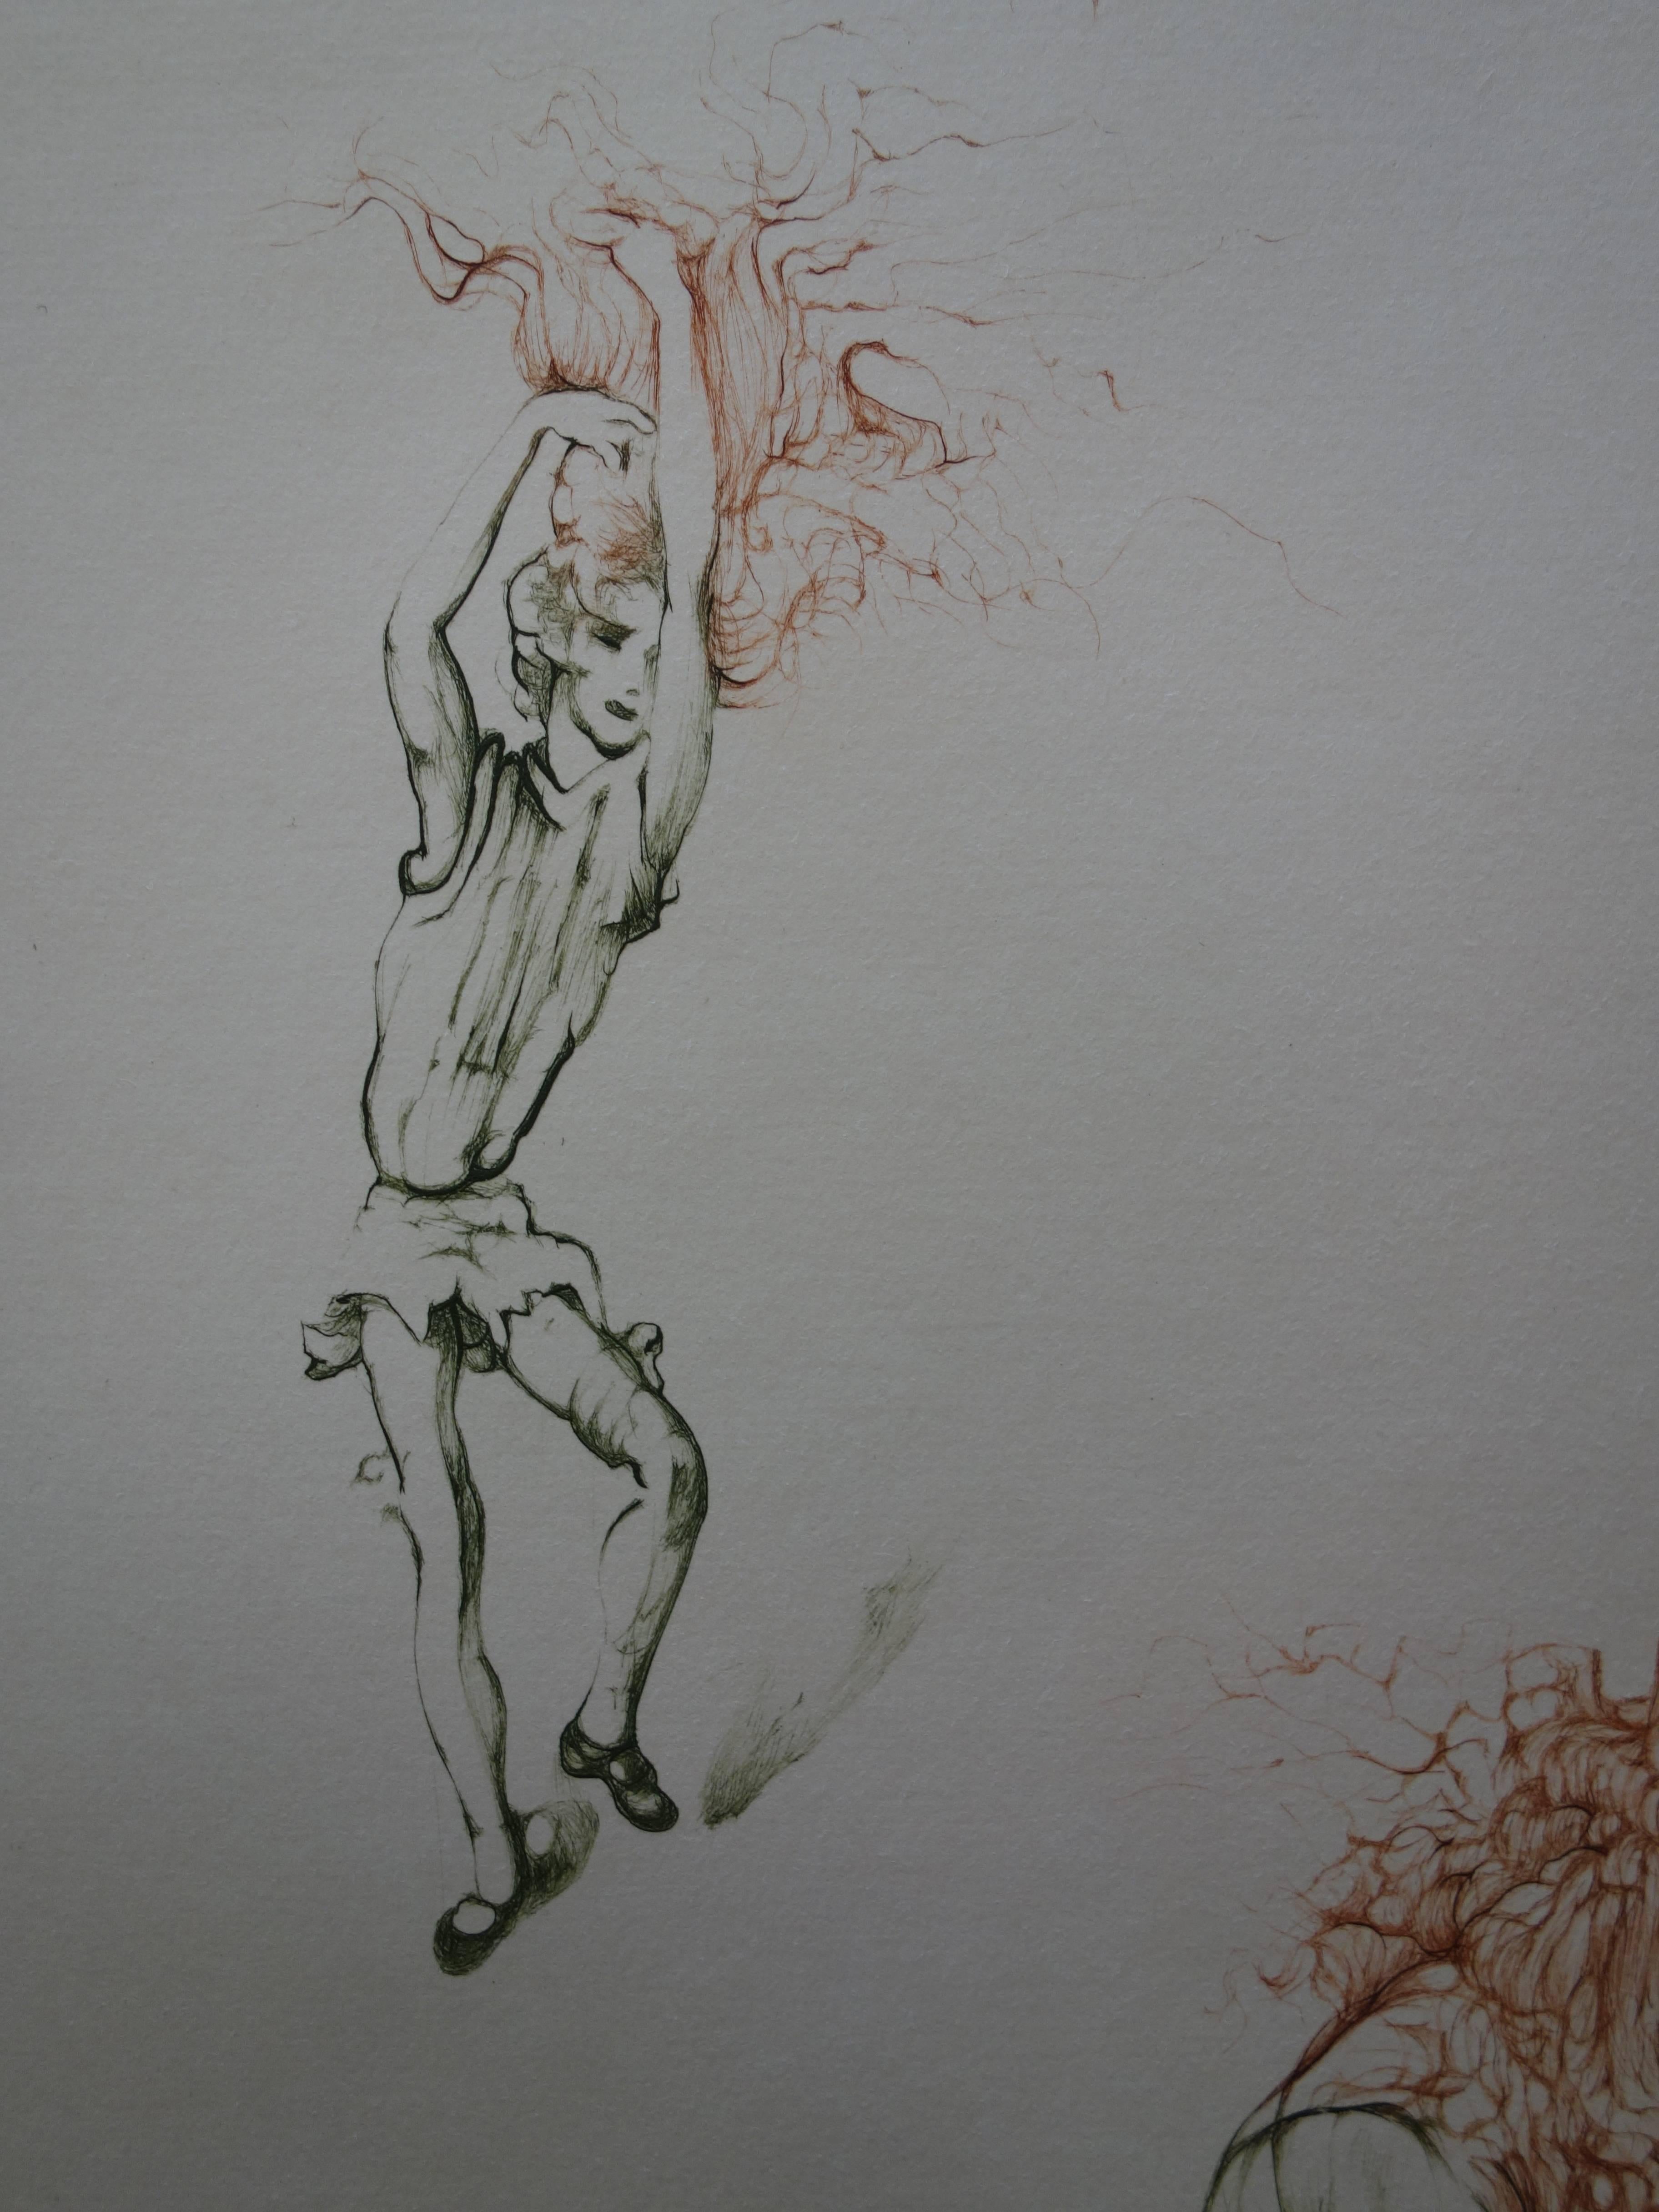 Hans BELLMER
Red Hair Girl in Fire

Original etching
Handsigned in pencil
Numbered on 150 copies
On Arches vellum 65 x 50 cm (c. 26 c 20in)

Excellent condition